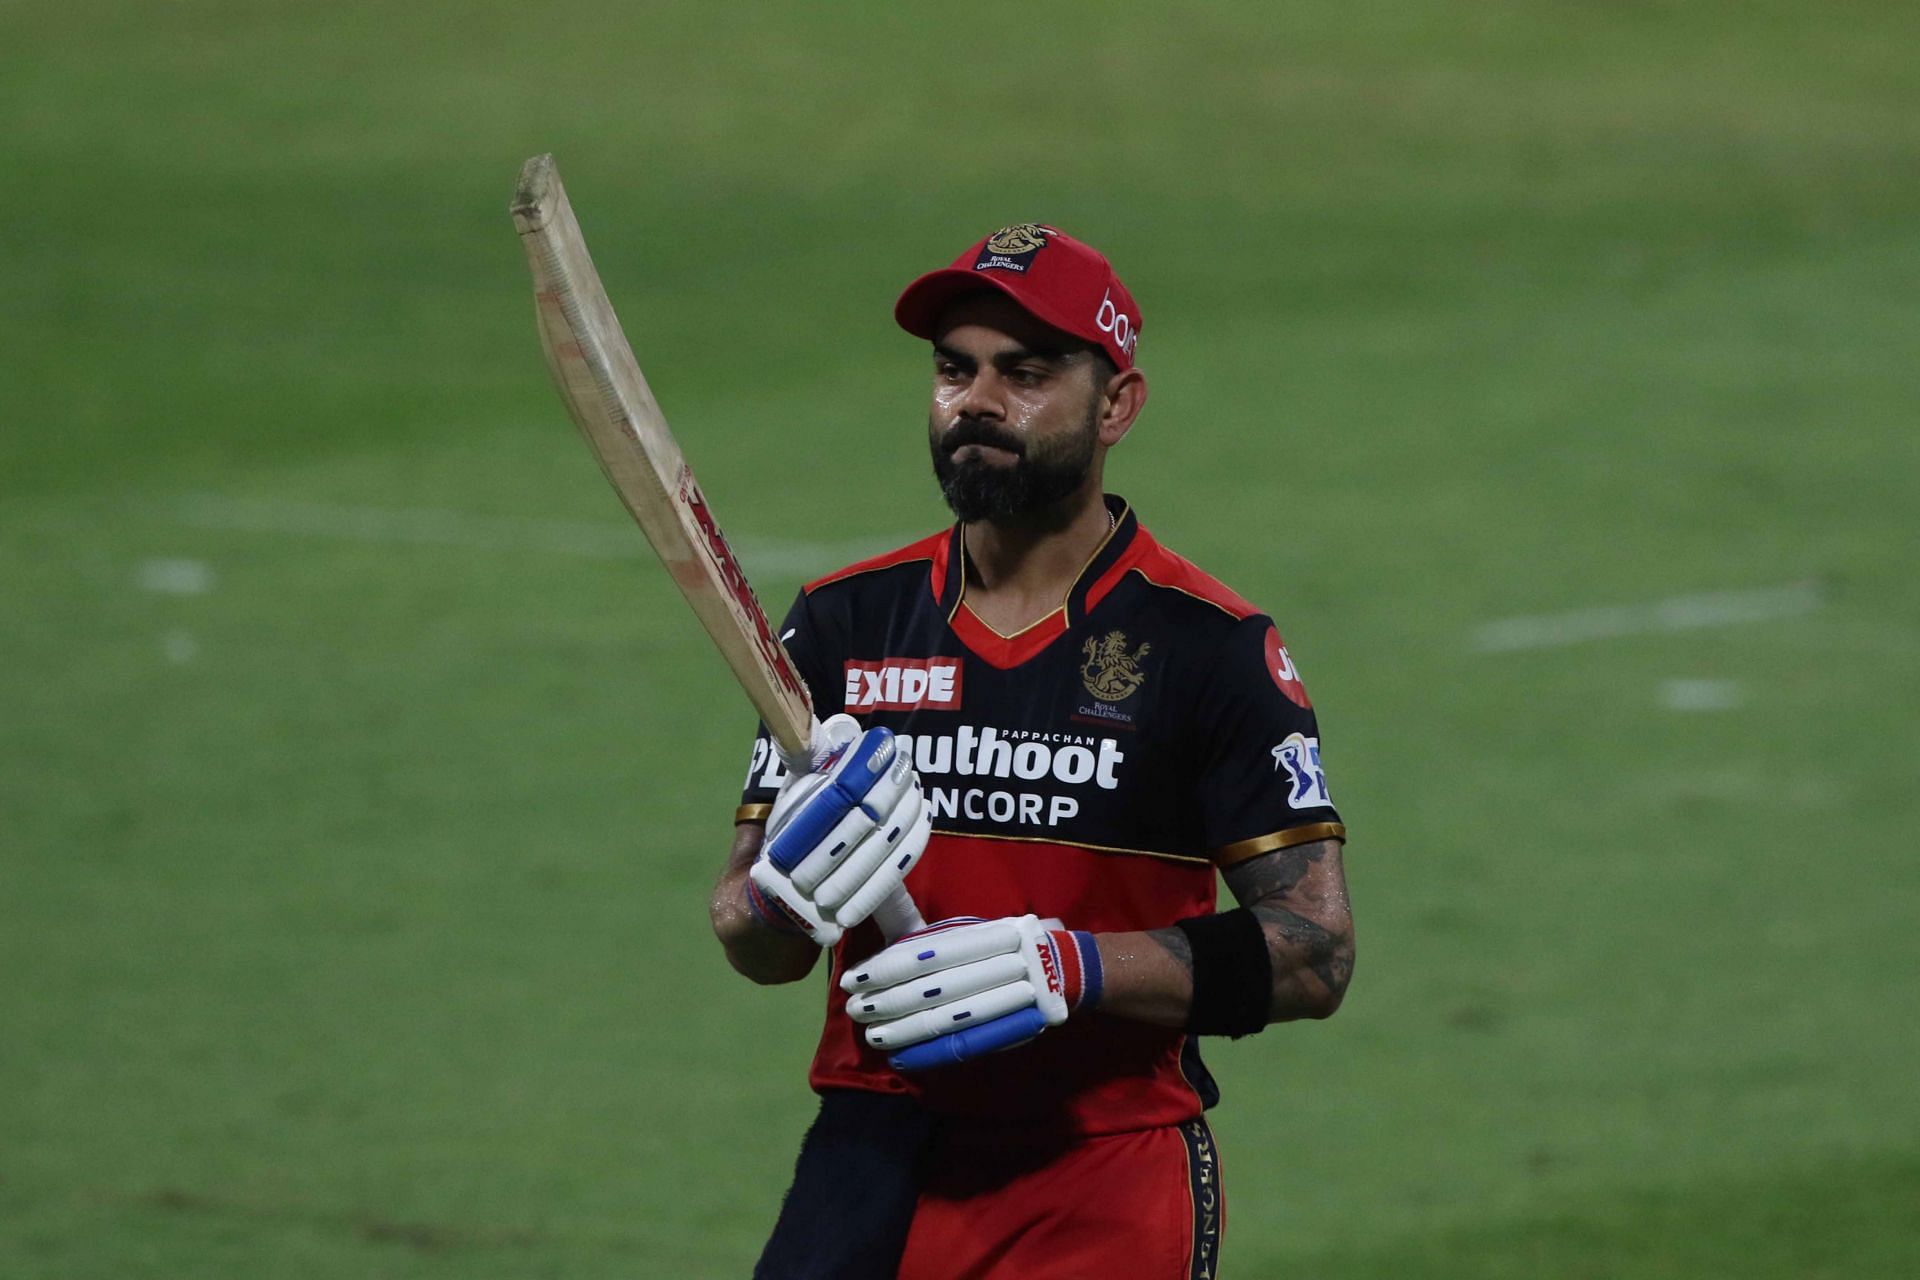 Virat Kohli has been retained by the Royal Challengers Bangalore ahead of IPL Auction 2022 (Image Courtesy: IPLT20.com)